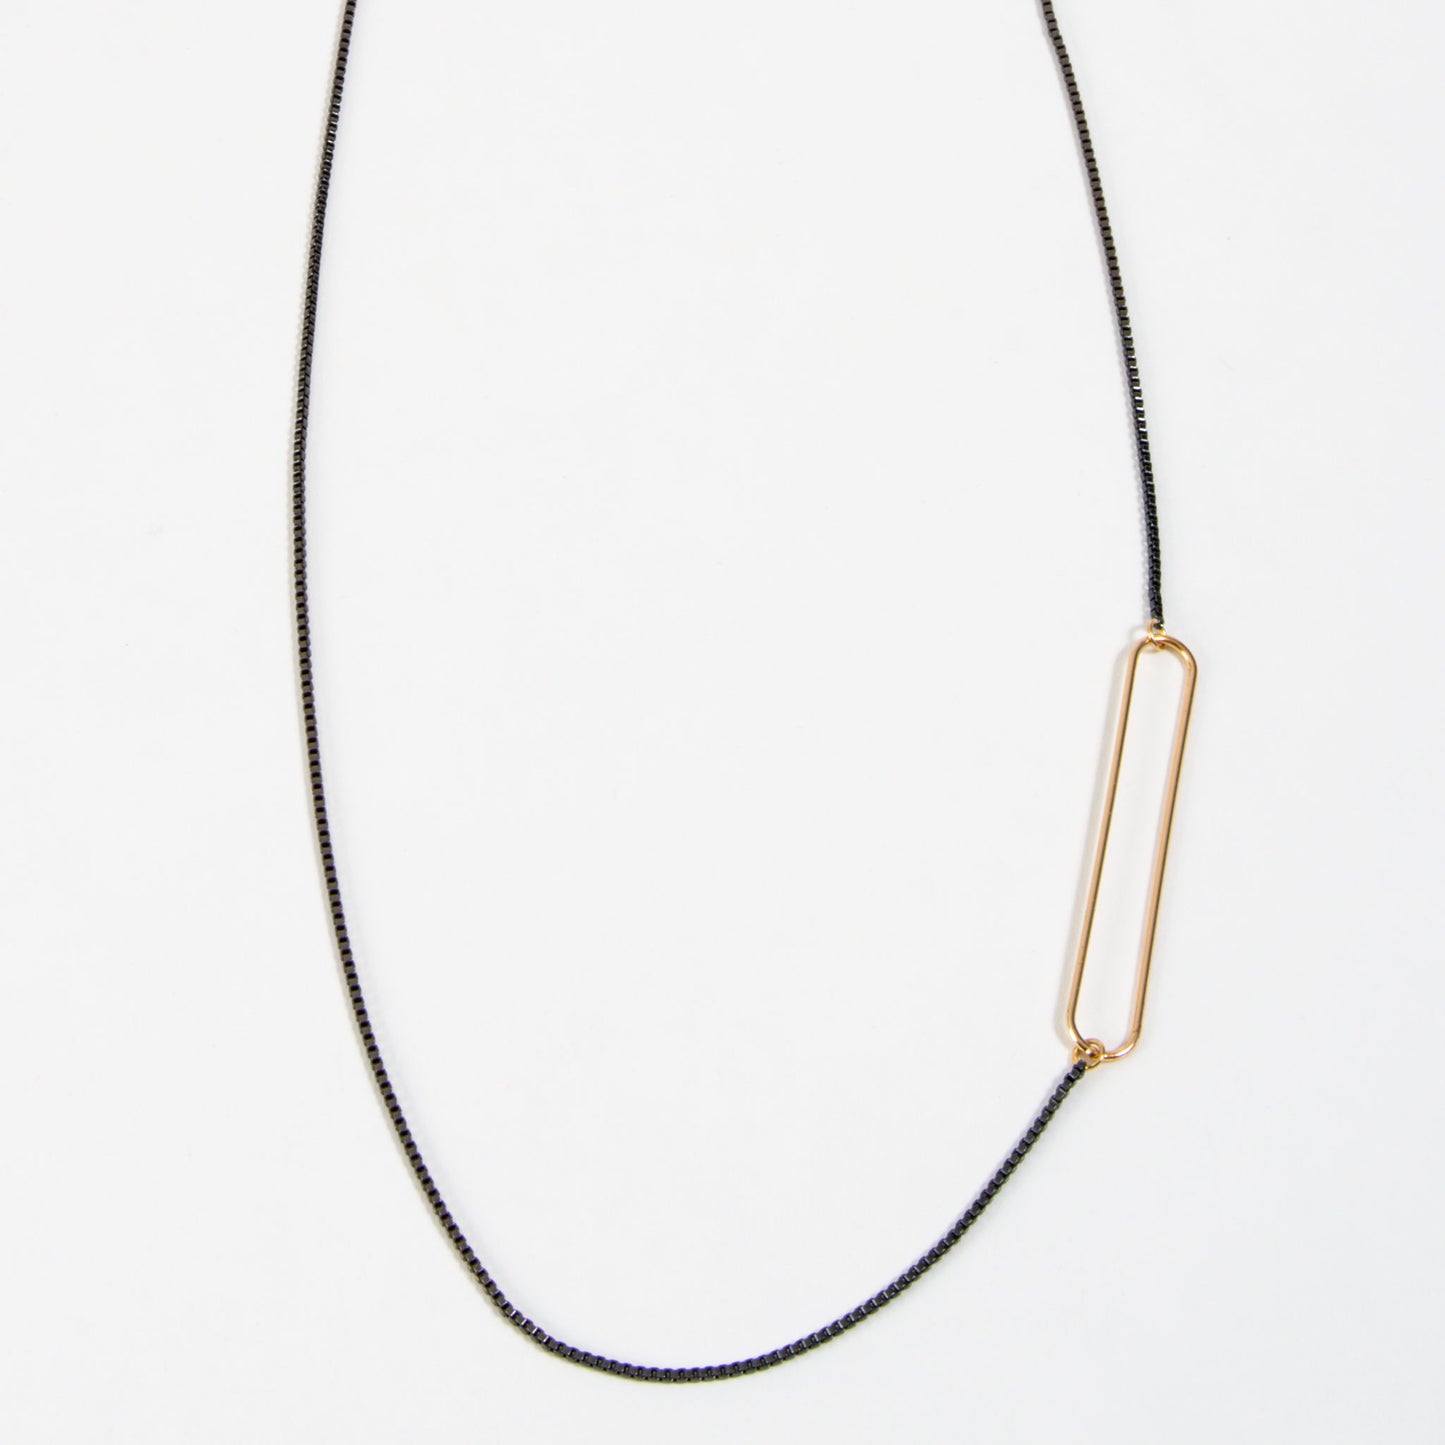 Lux Hematite & Gold Linked Chain Necklace